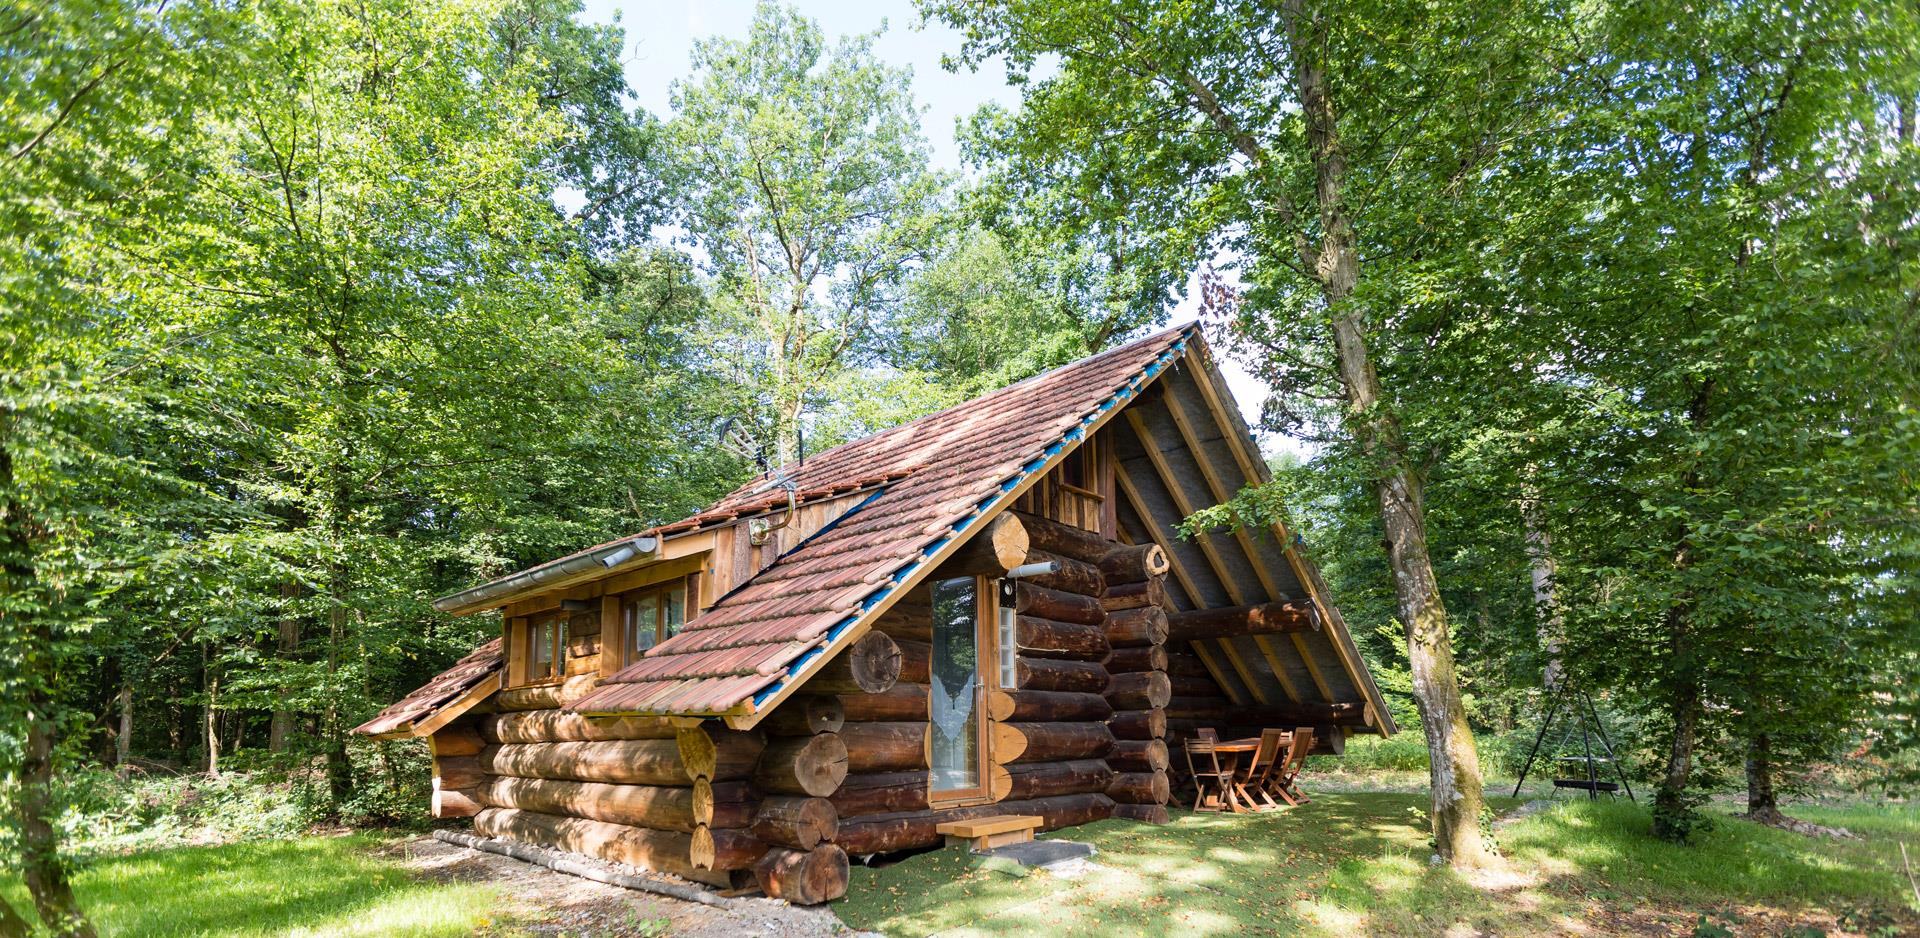 View of the Log Cabin, holiday home to rent at the Campsite Les Castors in Alsace